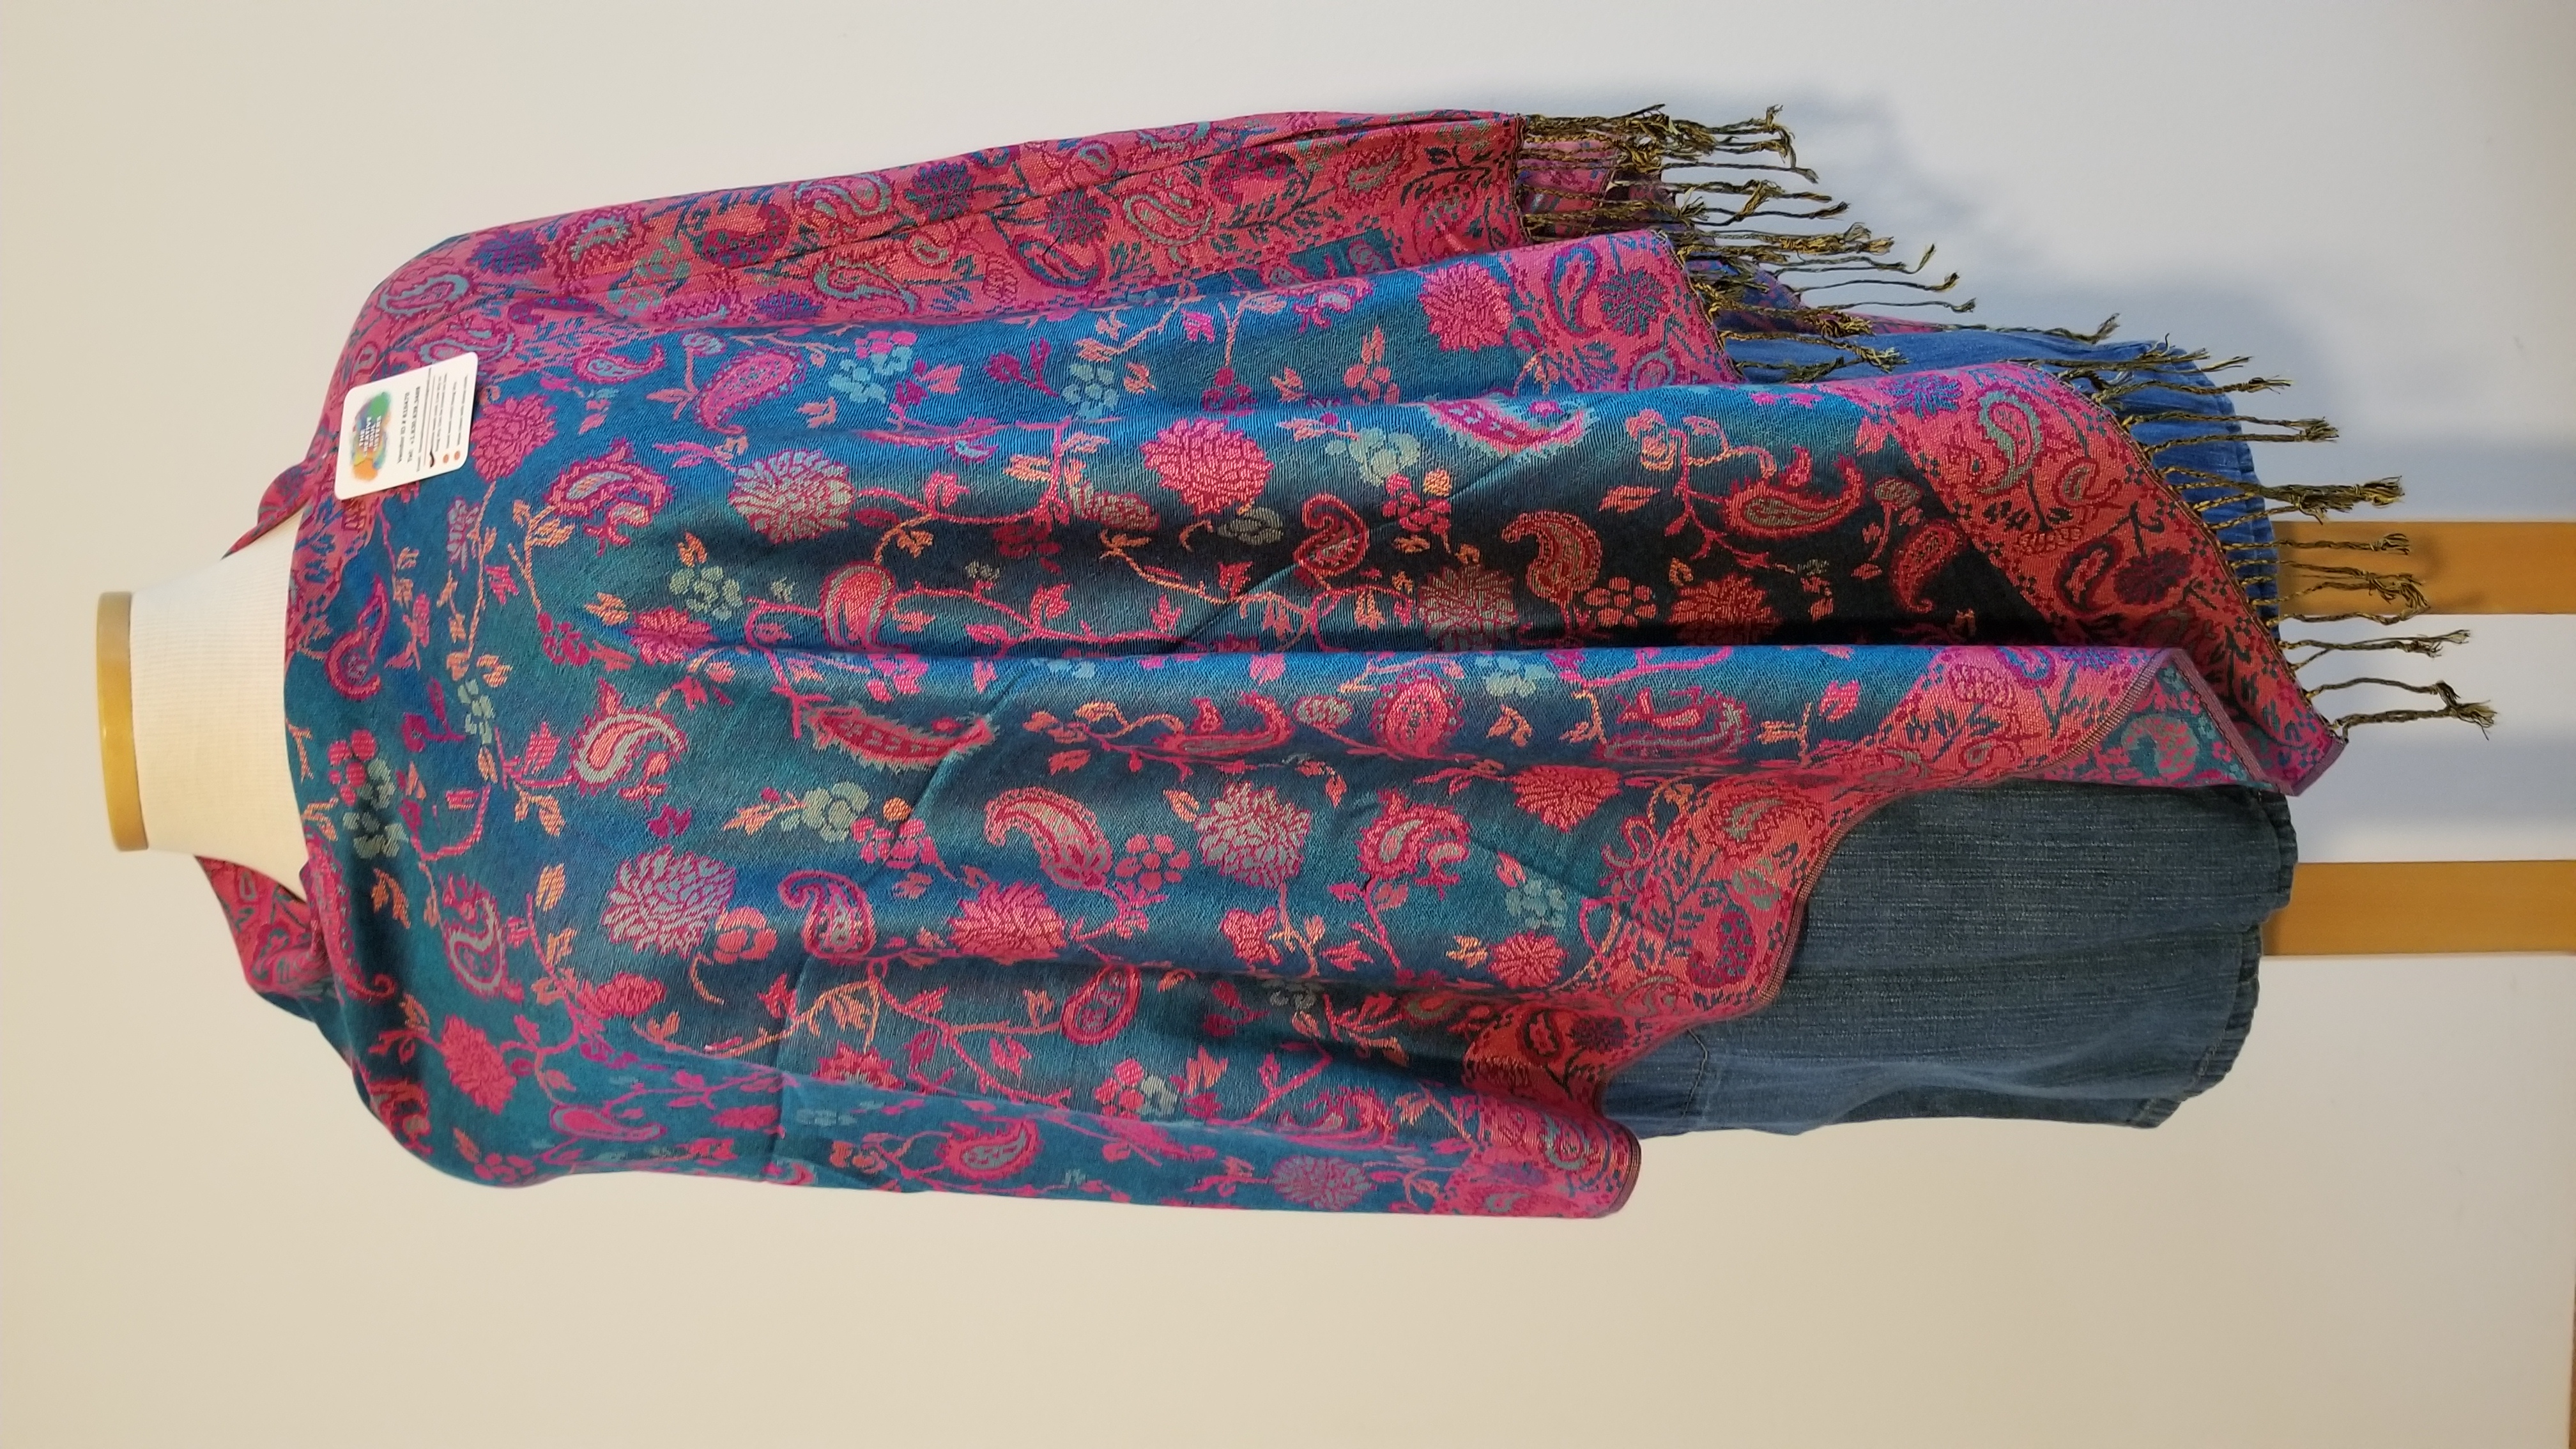 This Fuschia and Turquoise Paisley Flower Popover Reversible Shawlmina Shawl- Silk Blend - Fits most is made with love by The Creative Soul Sisters! Shop more unique gift ideas today with Spots Initiatives, the best way to support creators.